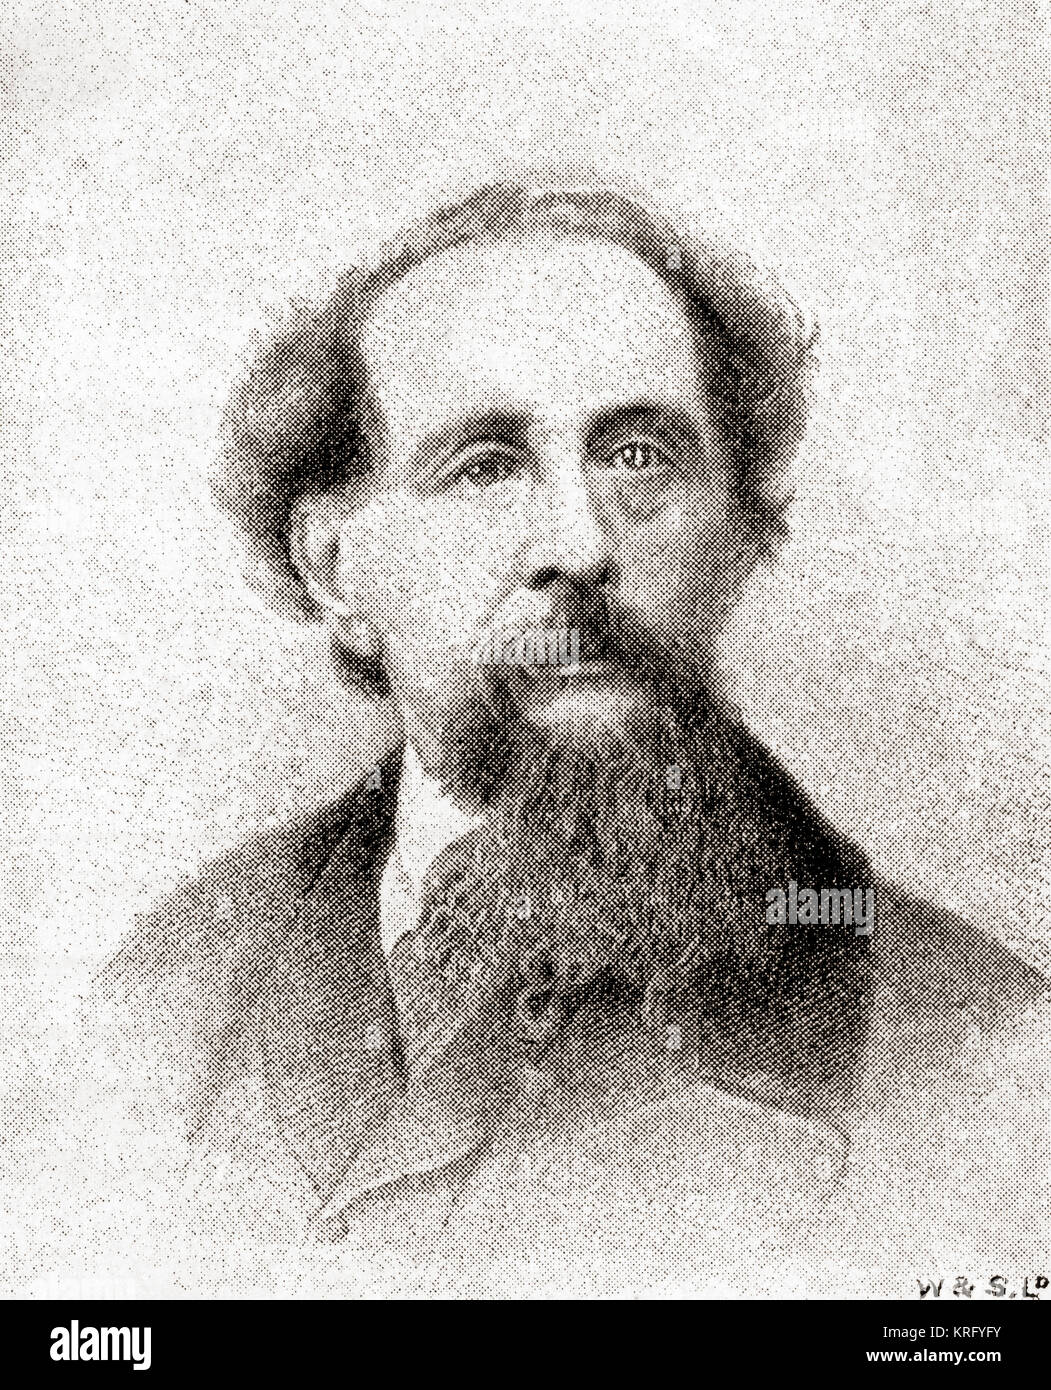 Charles John Huffam Dickens, 1812 – 1870.  English writer and social critic of the Victorian era. Seen here aged 51.  From The Strand Magazine, published January to June 1894. Stock Photo